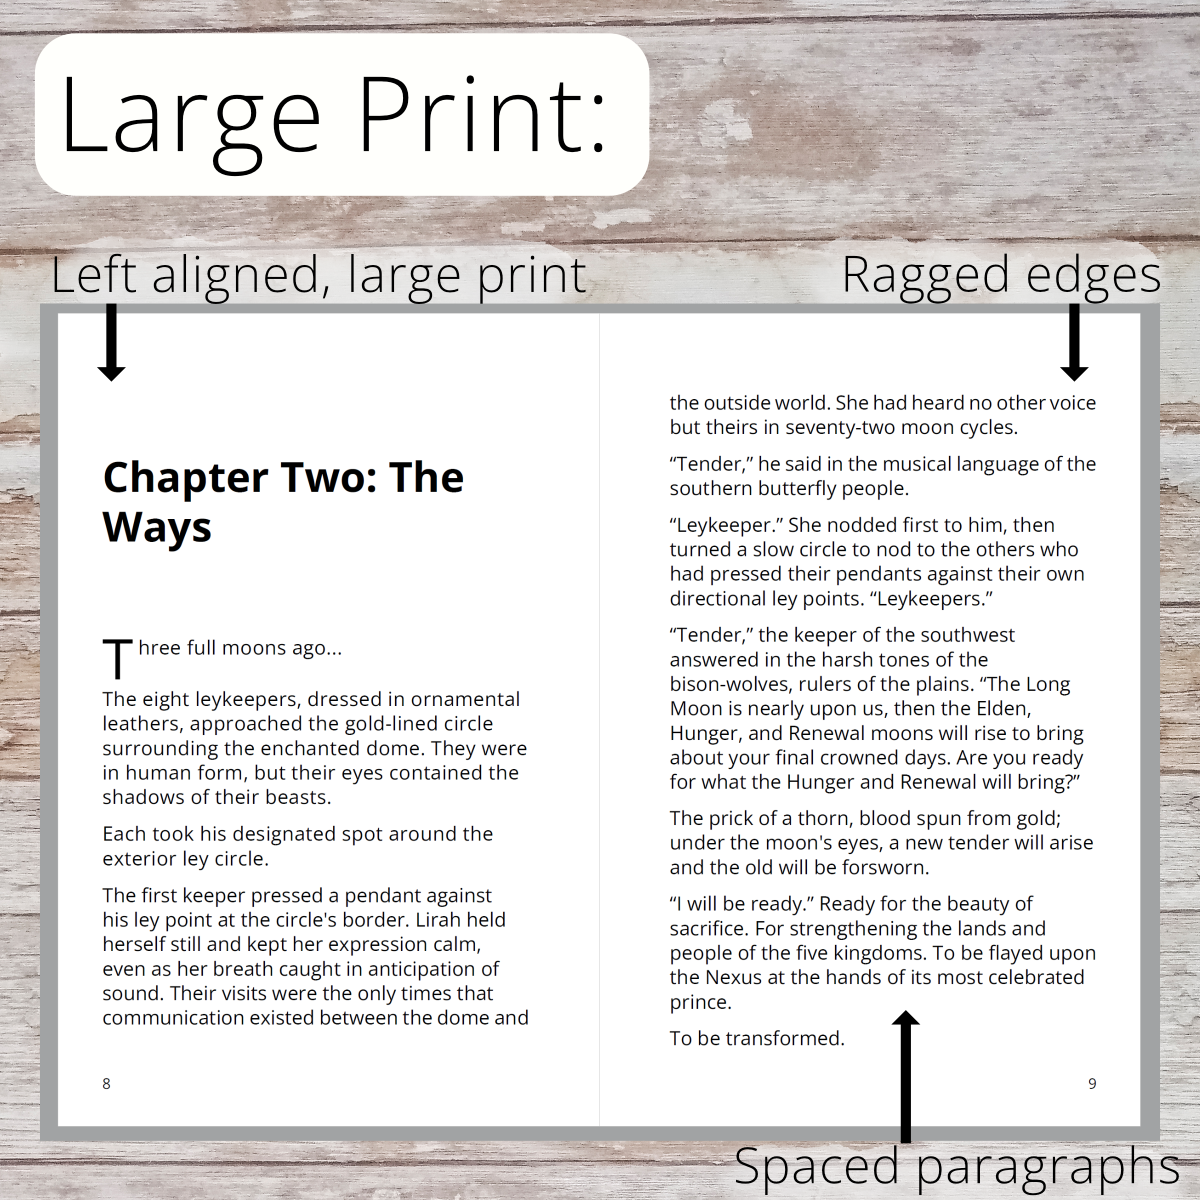 A visual example of large print text printed on two pages.